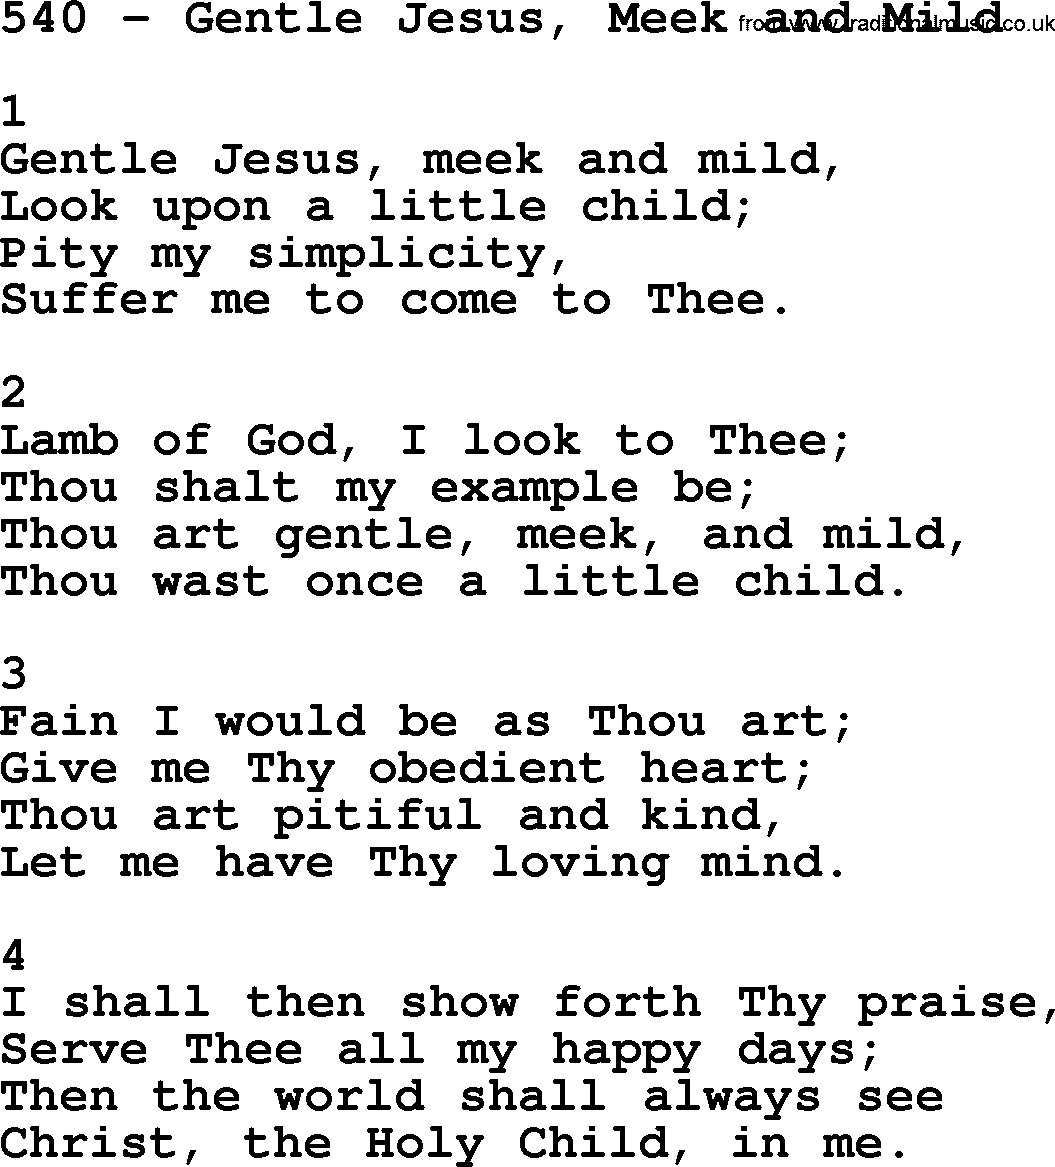 Complete Adventis Hymnal, title: 540-Gentle Jesus, Meek And Mild, with lyrics, midi, mp3, powerpoints(PPT) and PDF,